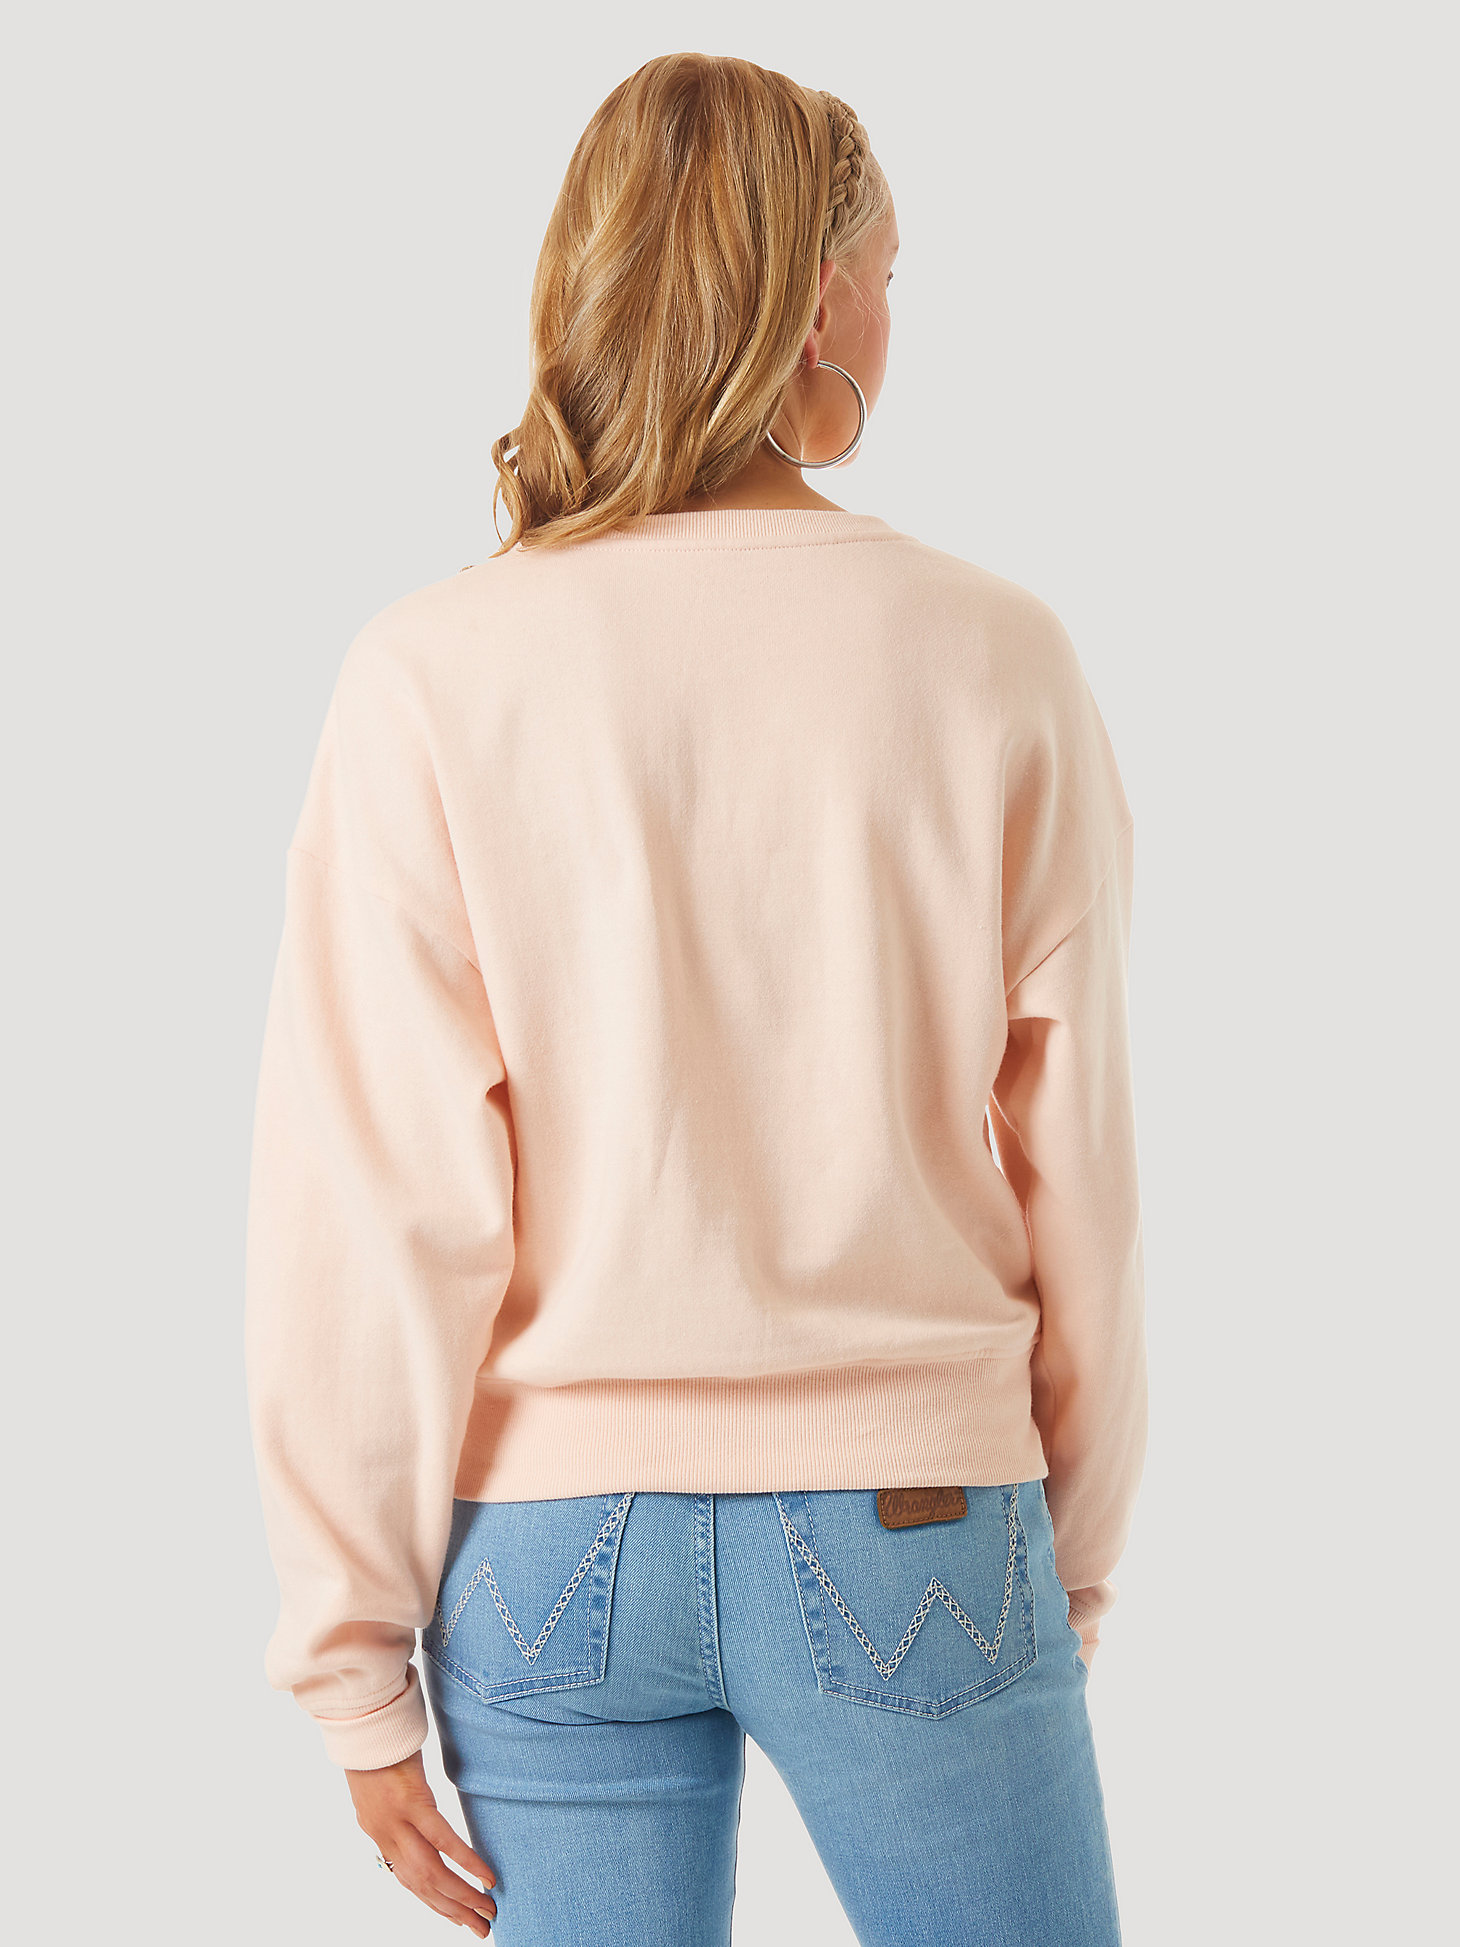 Women's Chenille Logo Embroidered Pullover in Pink alternative view 1